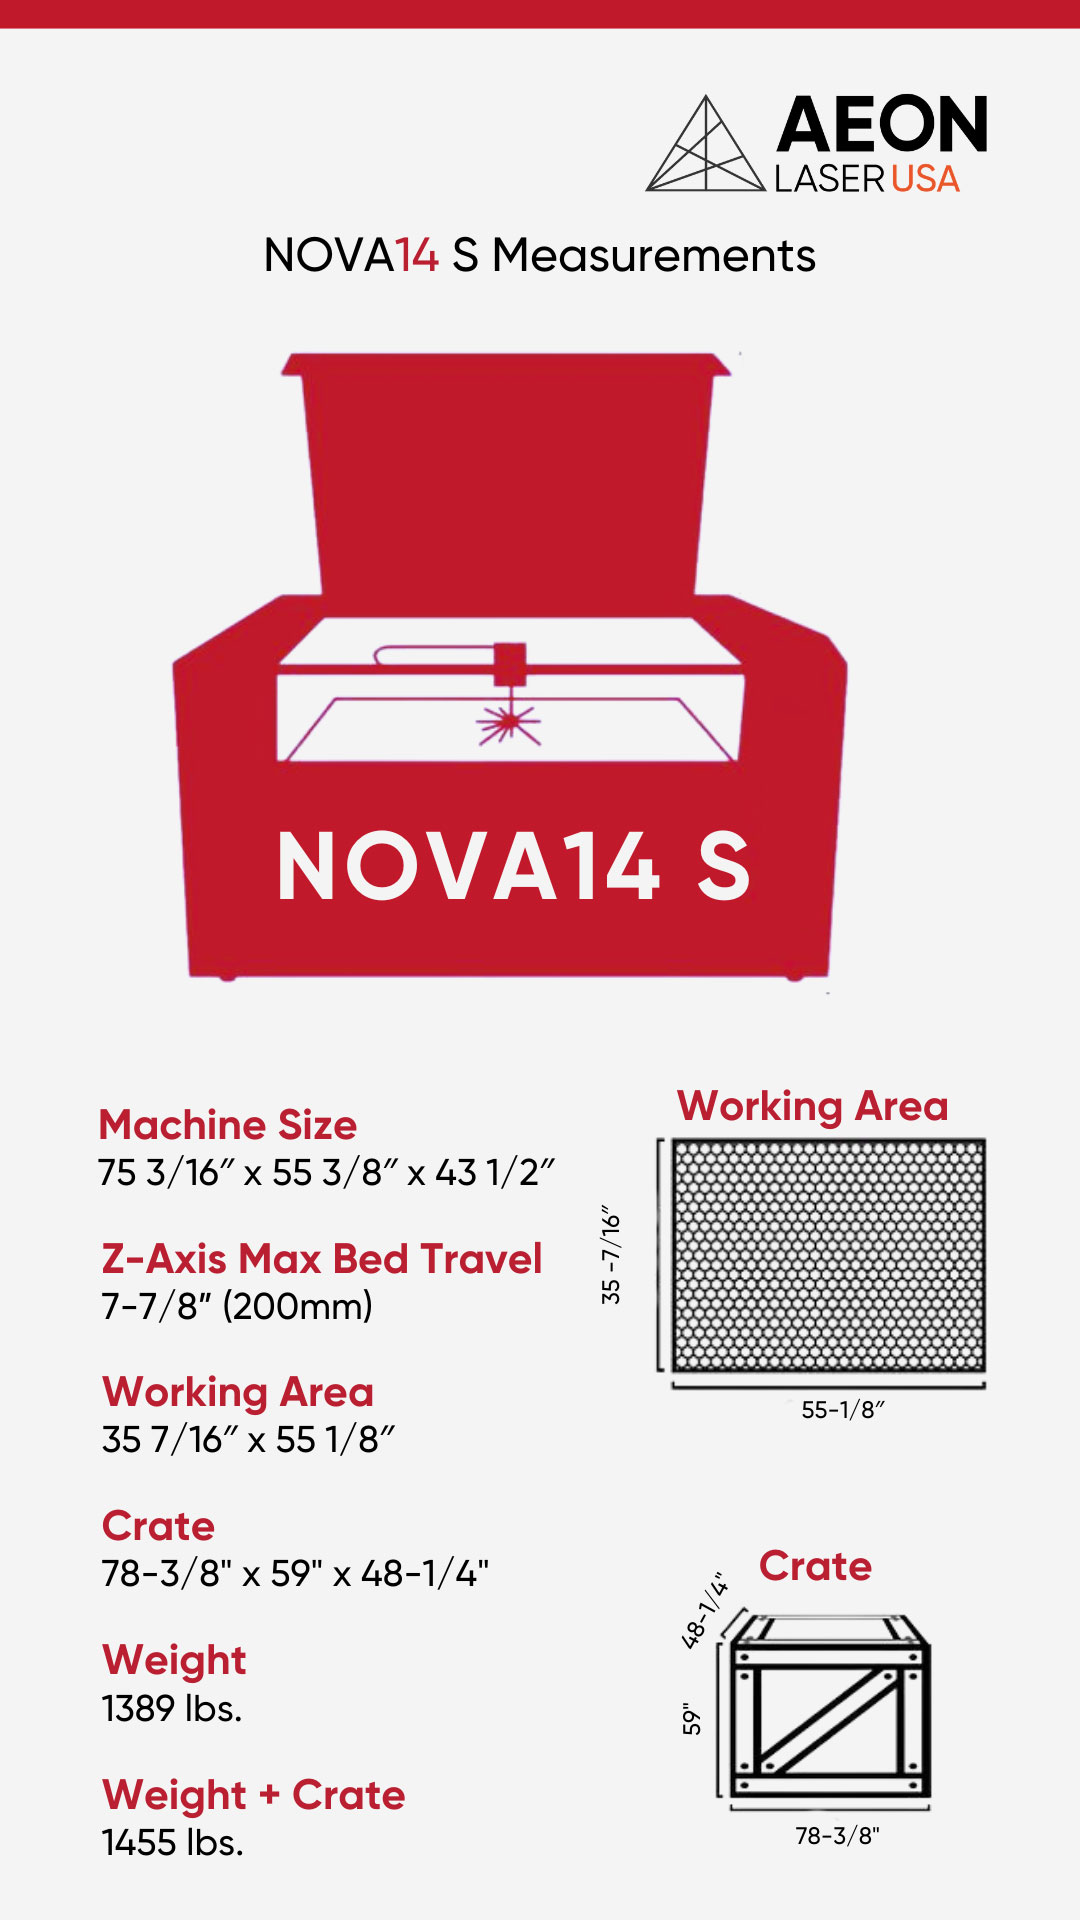 Graphic showing the dimensions of the NOVA 14 S laser, crate size, and weight info